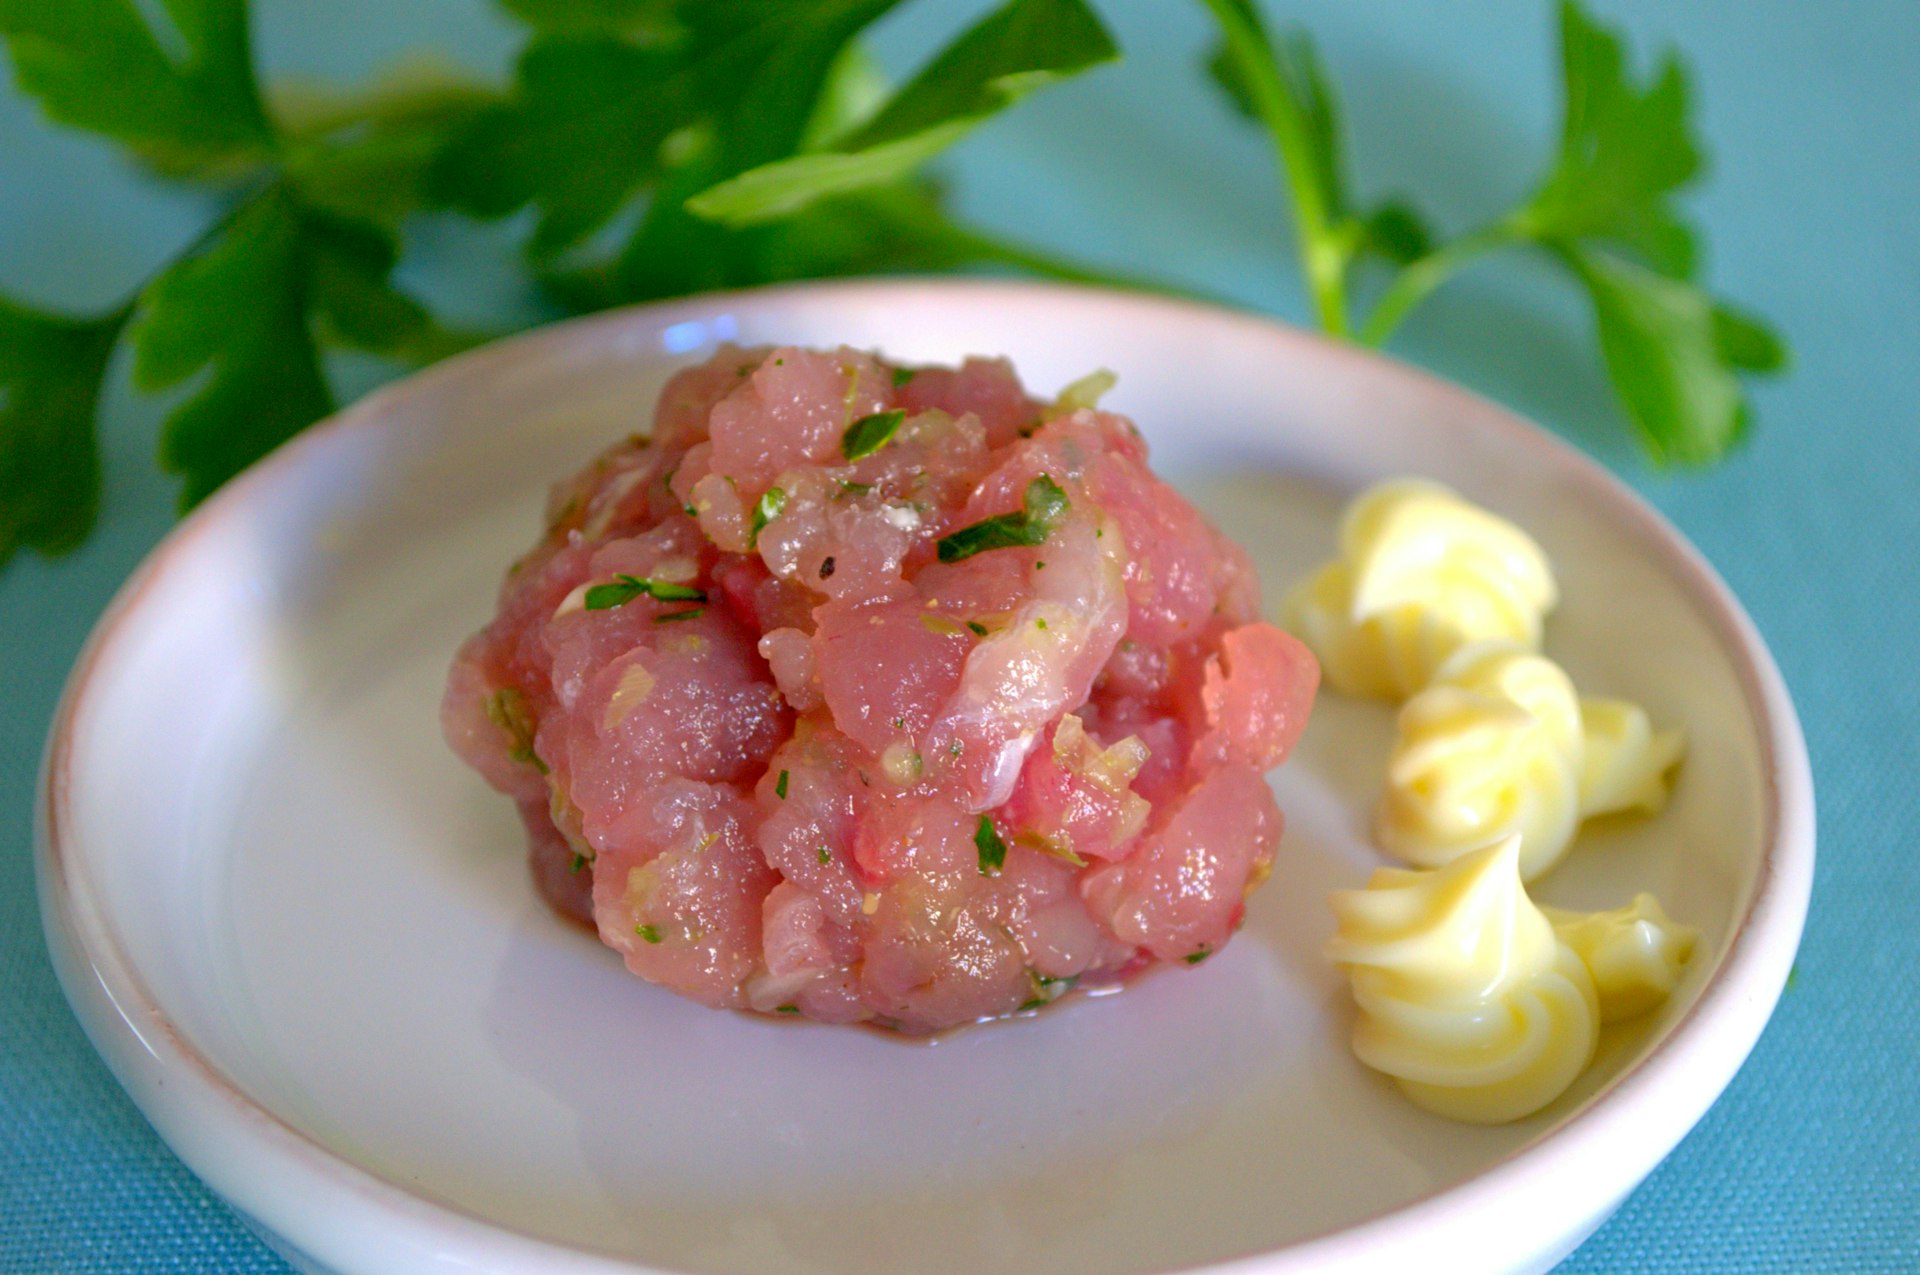 On round white saucer, raw palamita fish meatball, pink color with small pieces of chopped green parsley. On the right three tufts of yellow mayonnaise. At the top a tuft of green parsley. On the bottom turquoise tablecloth.